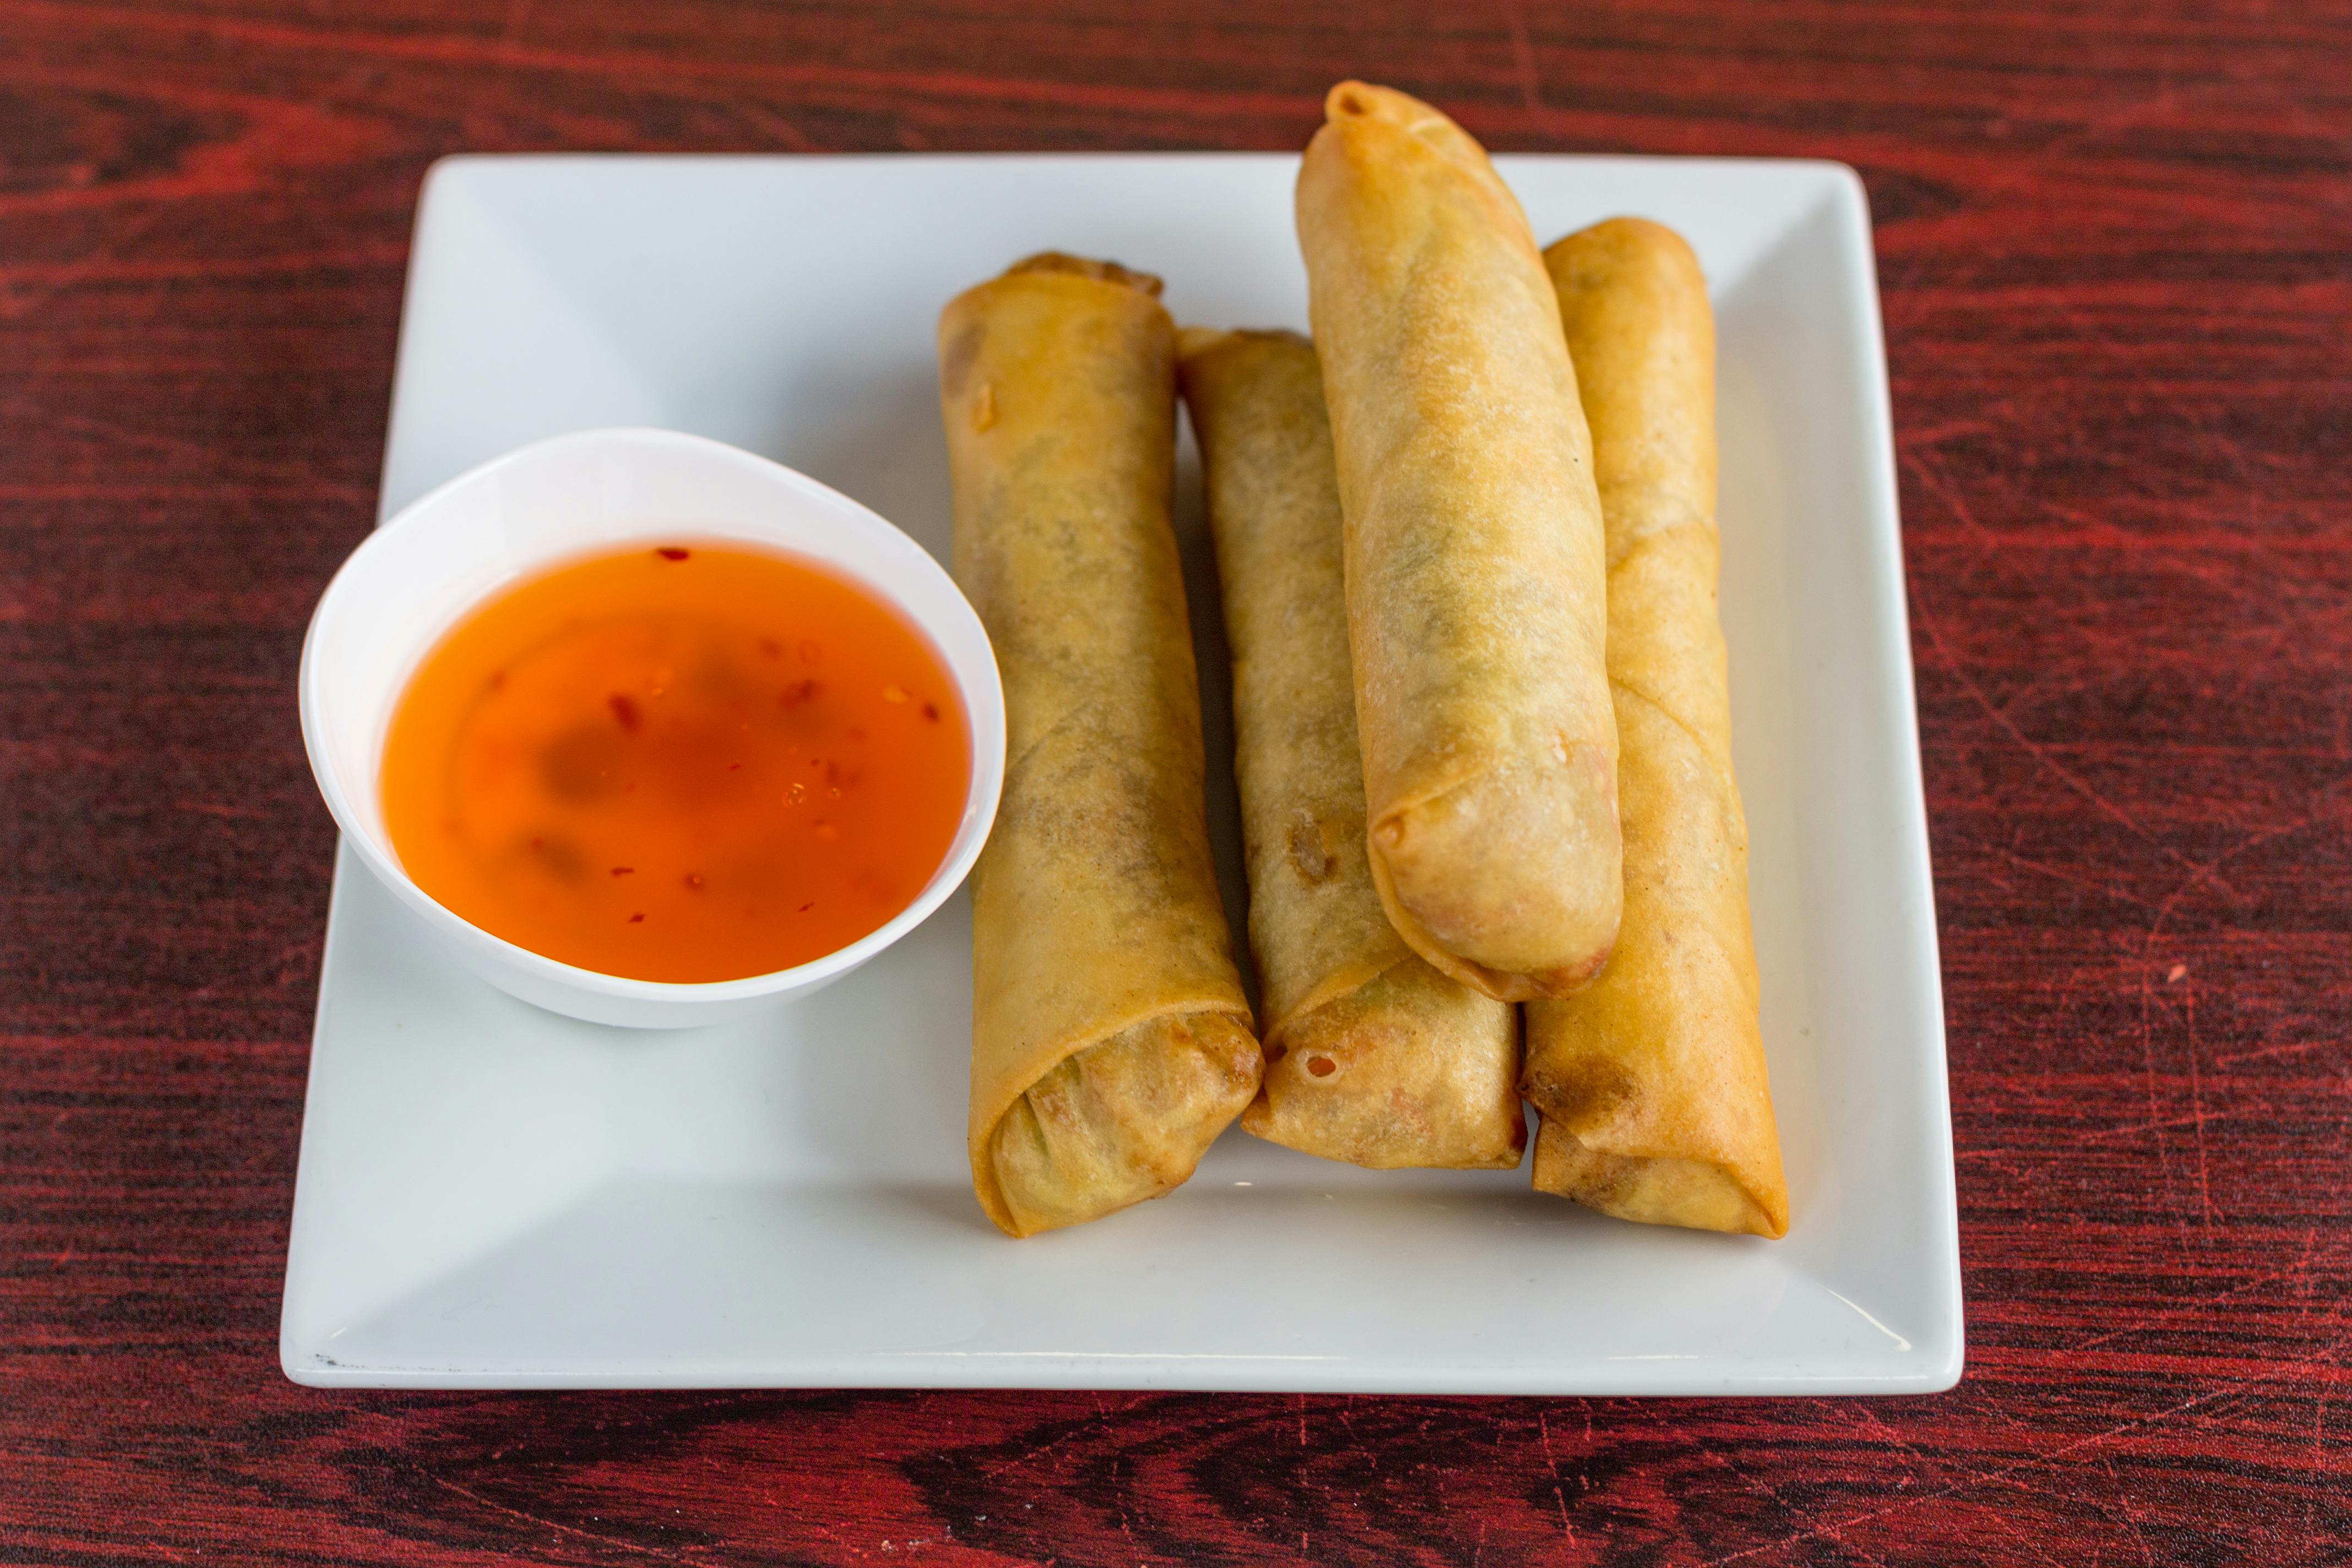 #1. Cheese Egg Rolls - 2 Pieces from Five Star Eggrolls in La Crosse, WI